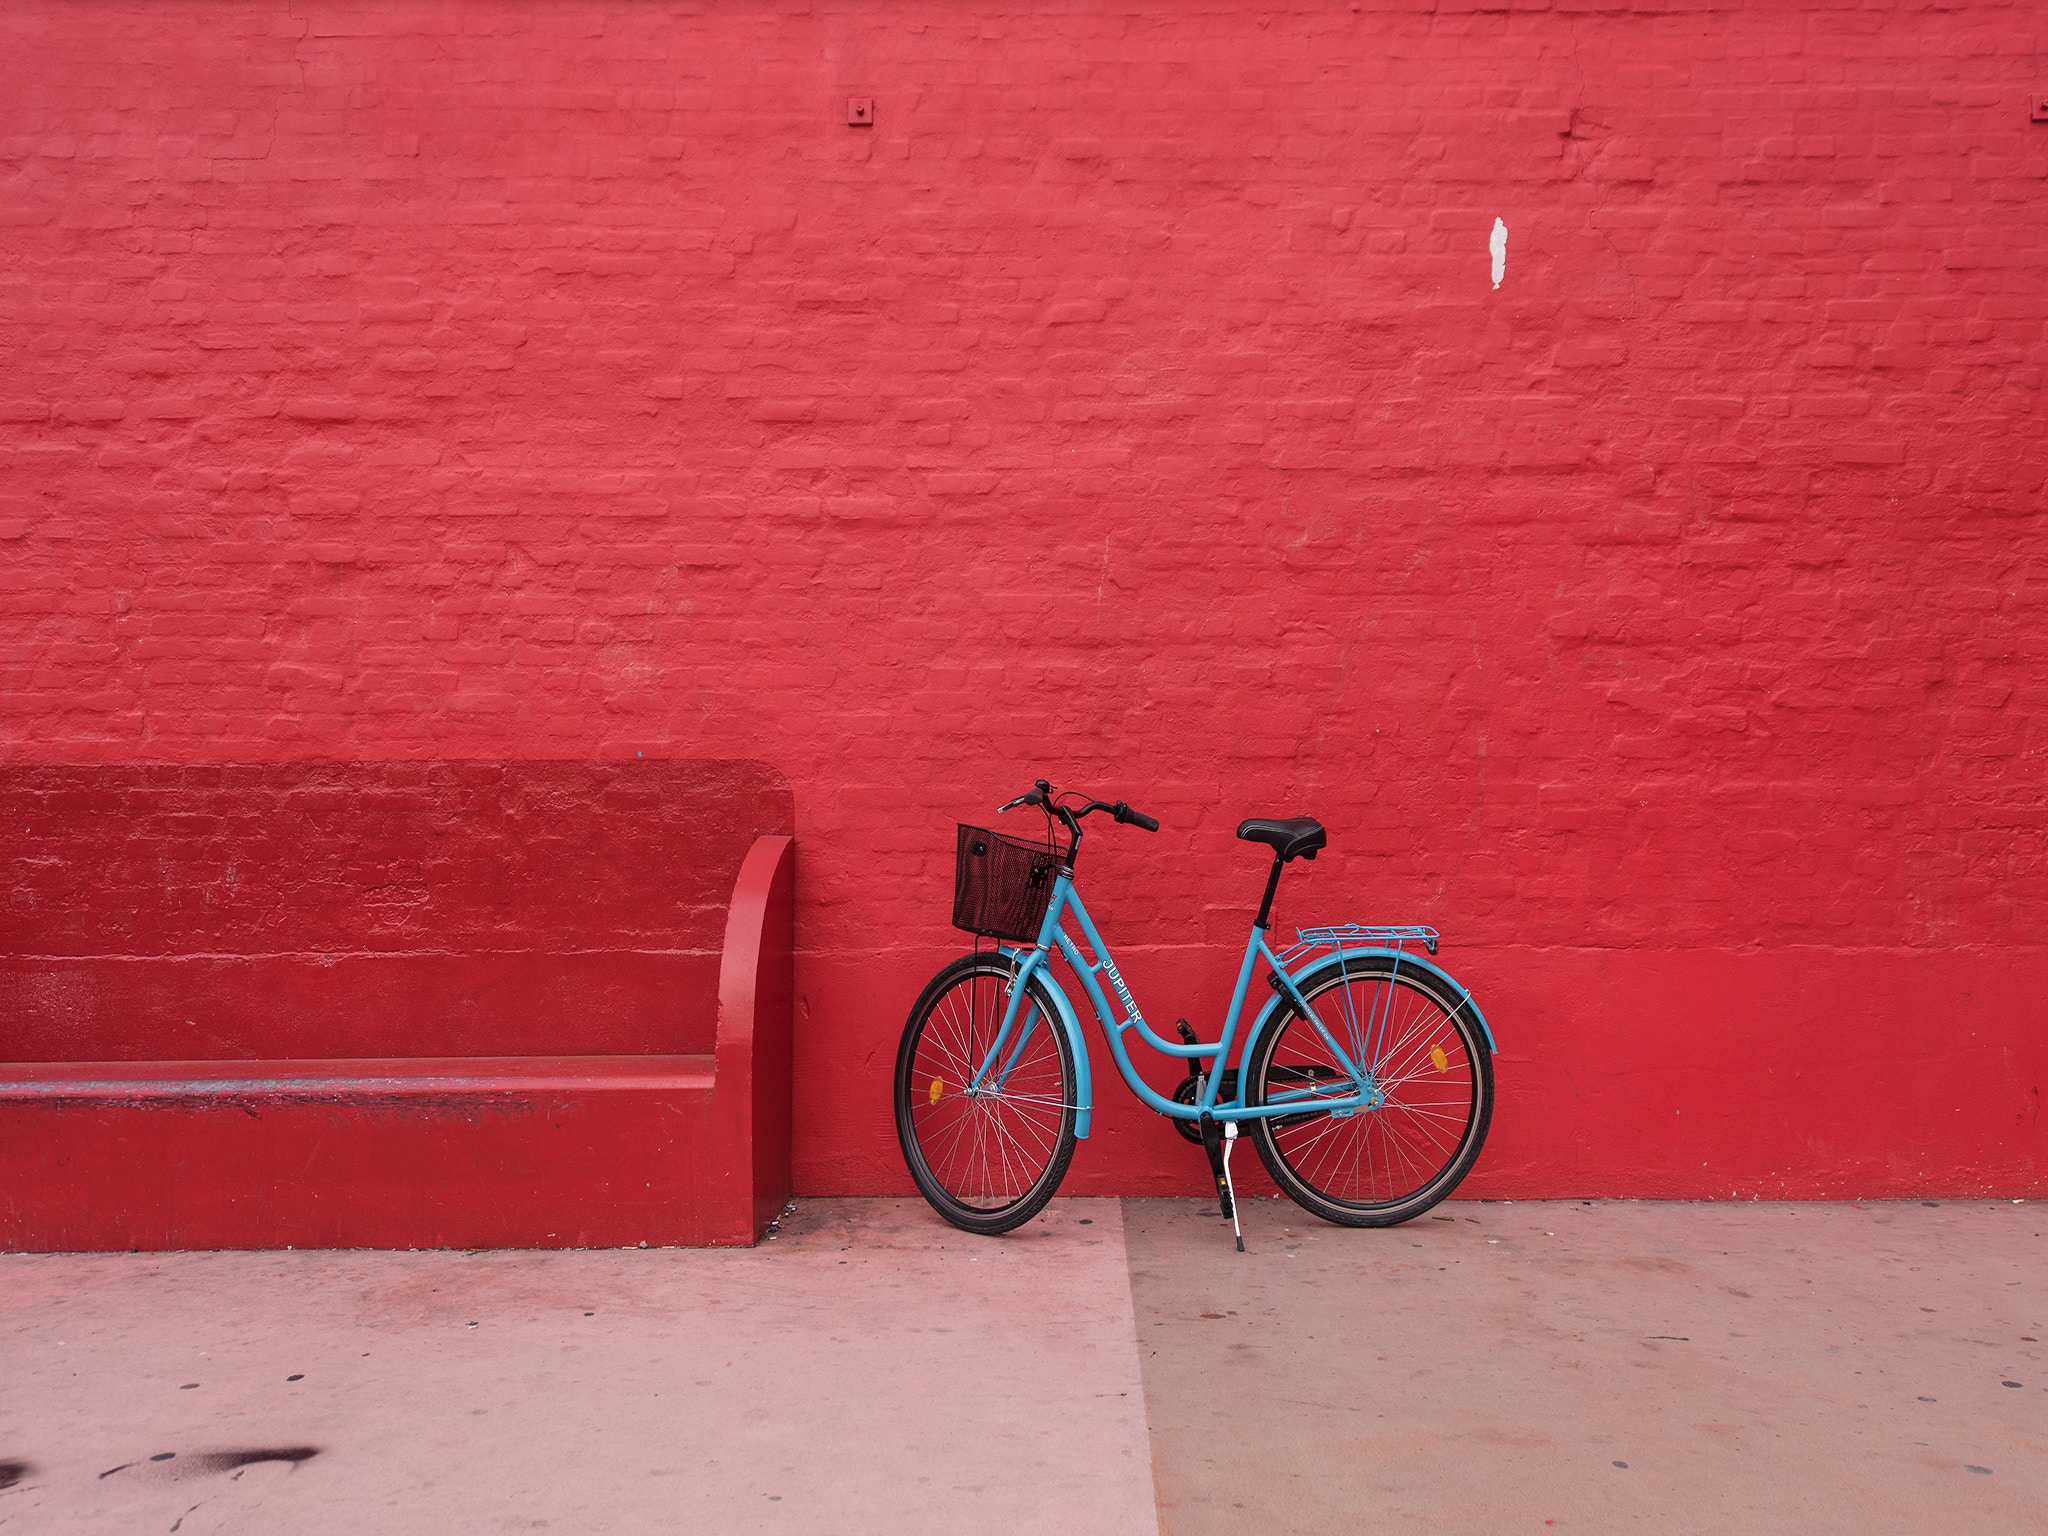 wall, bicycle, miscellanea, red, miscellaneous